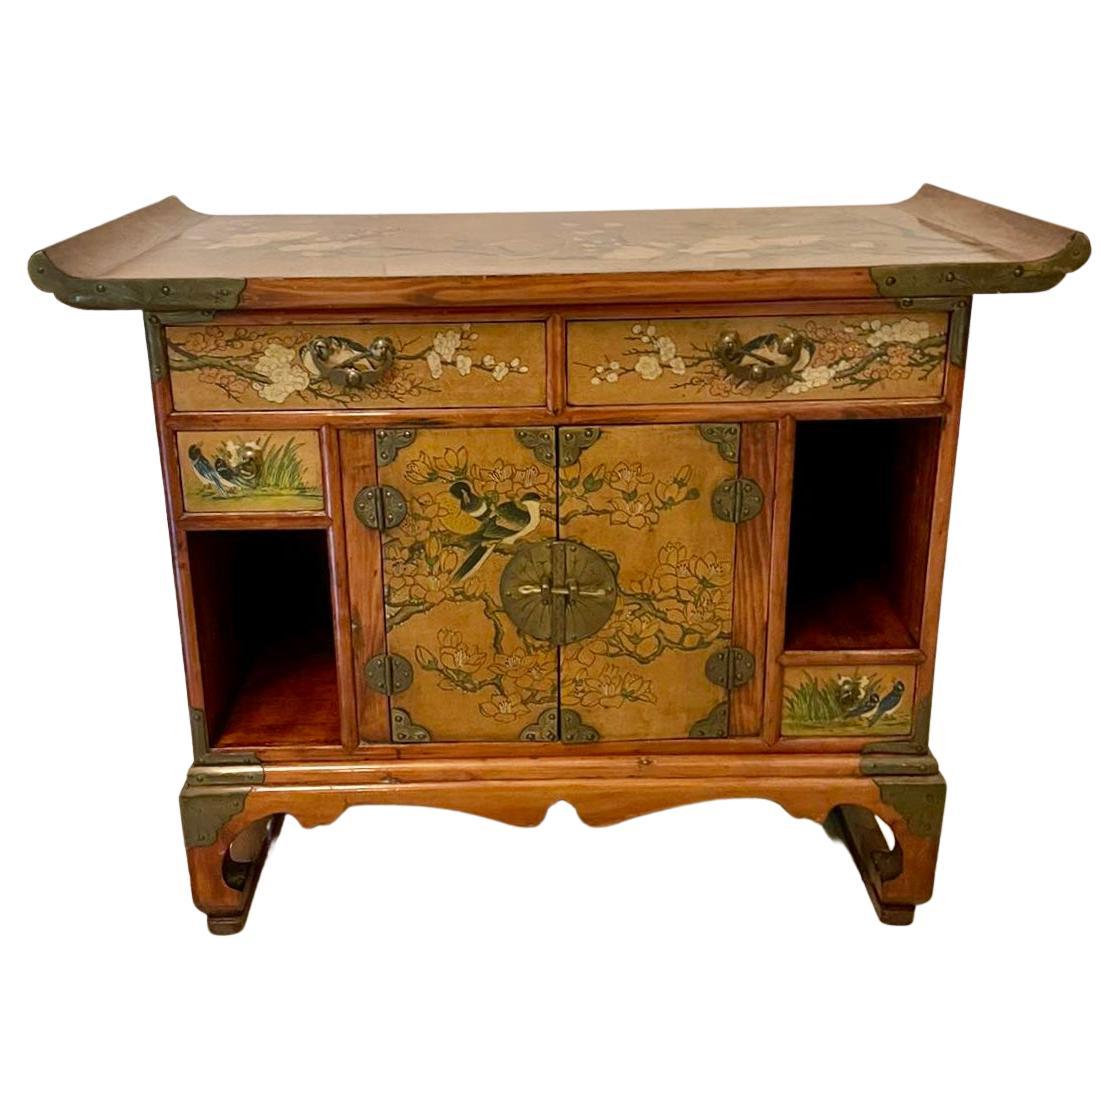 Fine Quality Antique Japanese Floral Decorated Table Cabinet